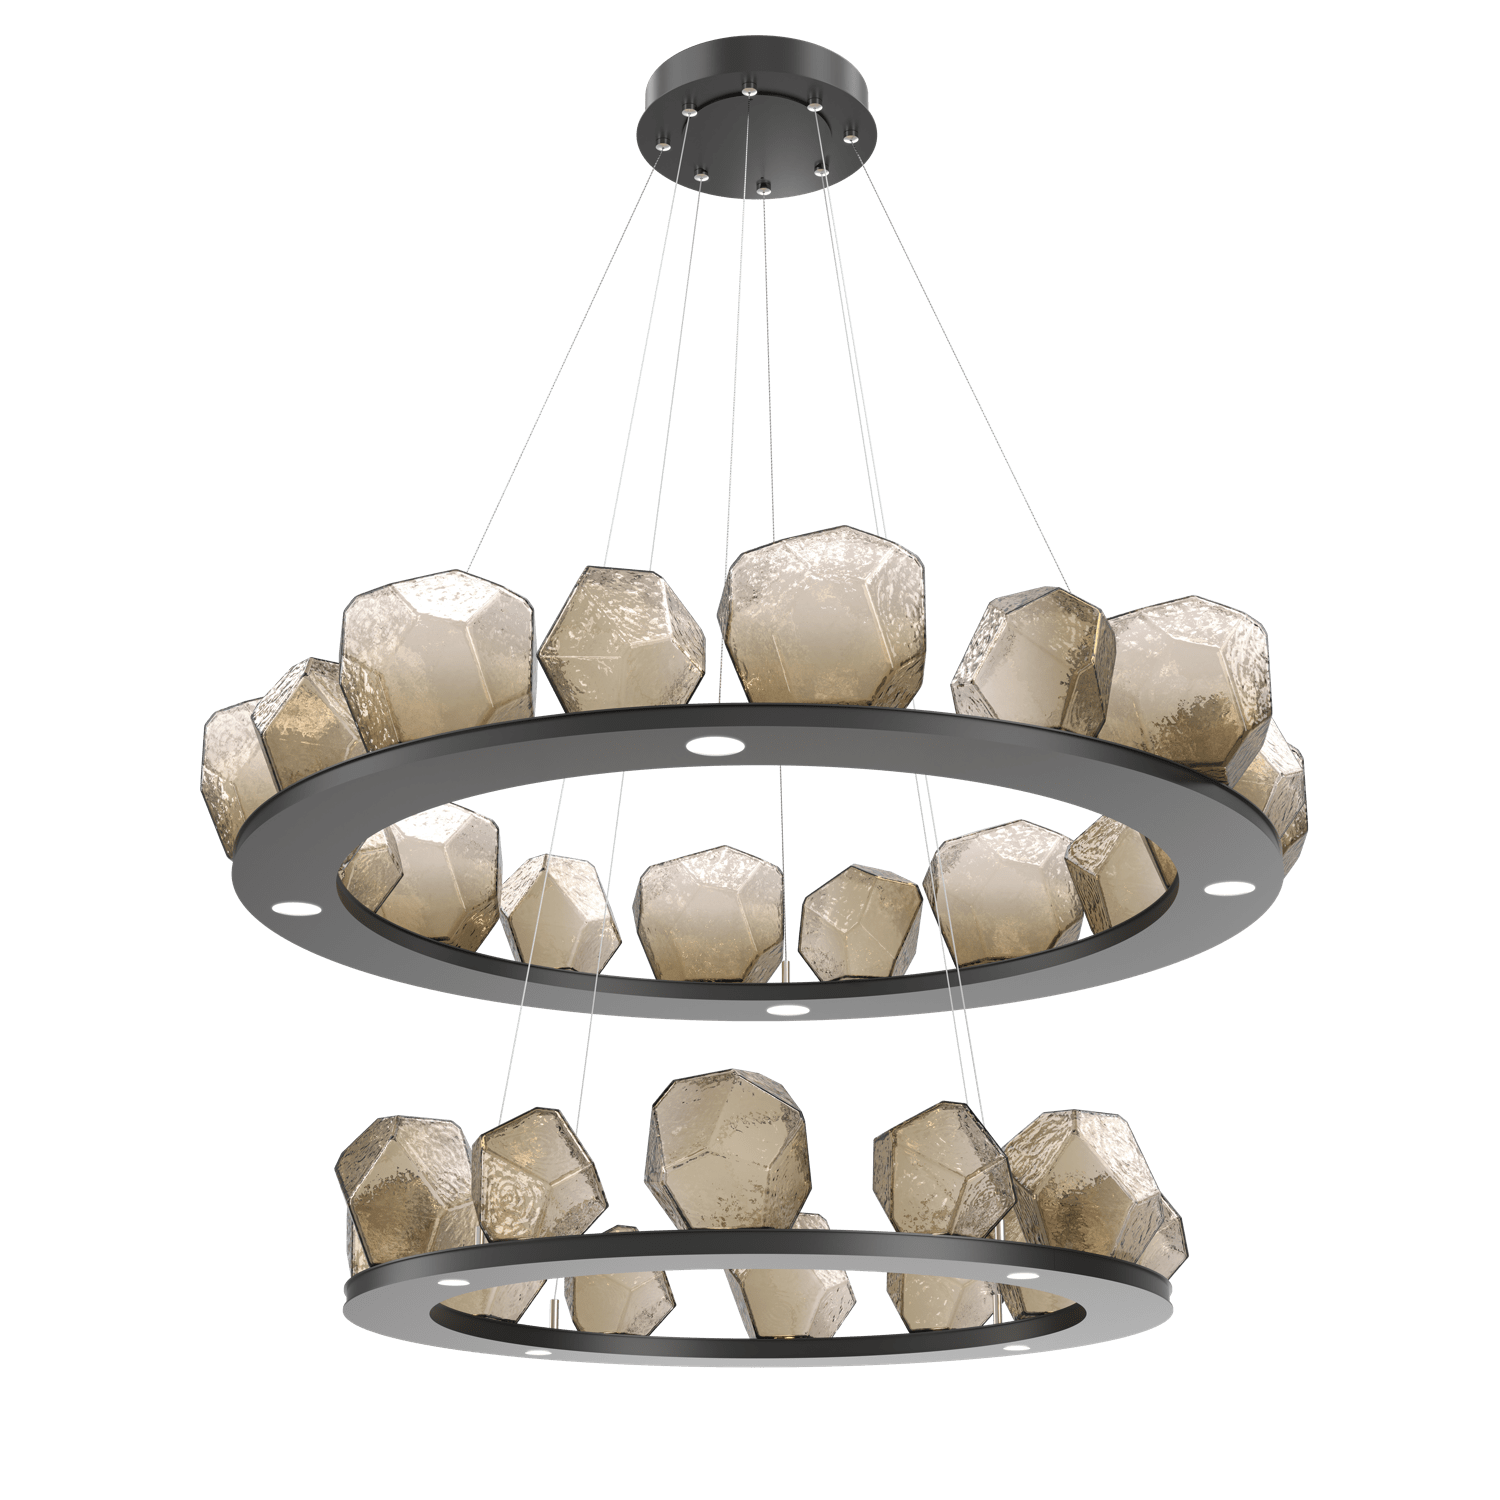 CHB0039-2B-MB-B-Hammerton-Studio-Gem-48-inch-two-tier-ring-chandelier-with-matte-black-finish-and-bronze-blown-glass-shades-and-LED-lamping